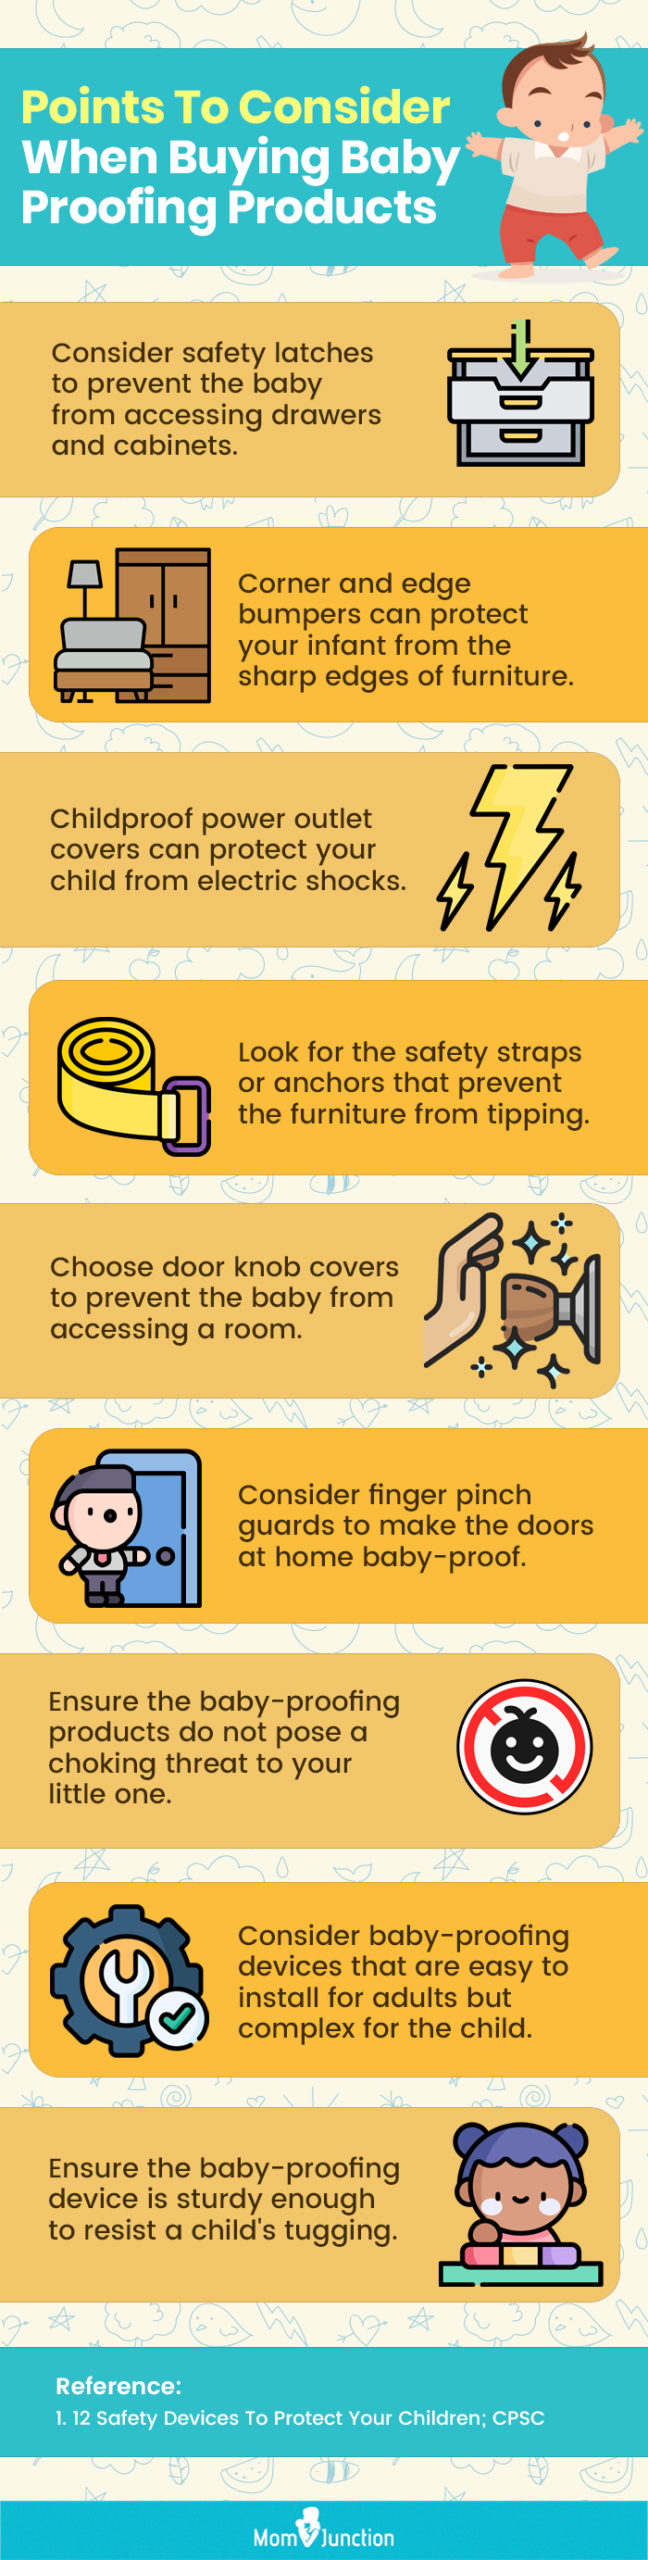 Points To Consider When Buying Baby Proofing Products (infographic)